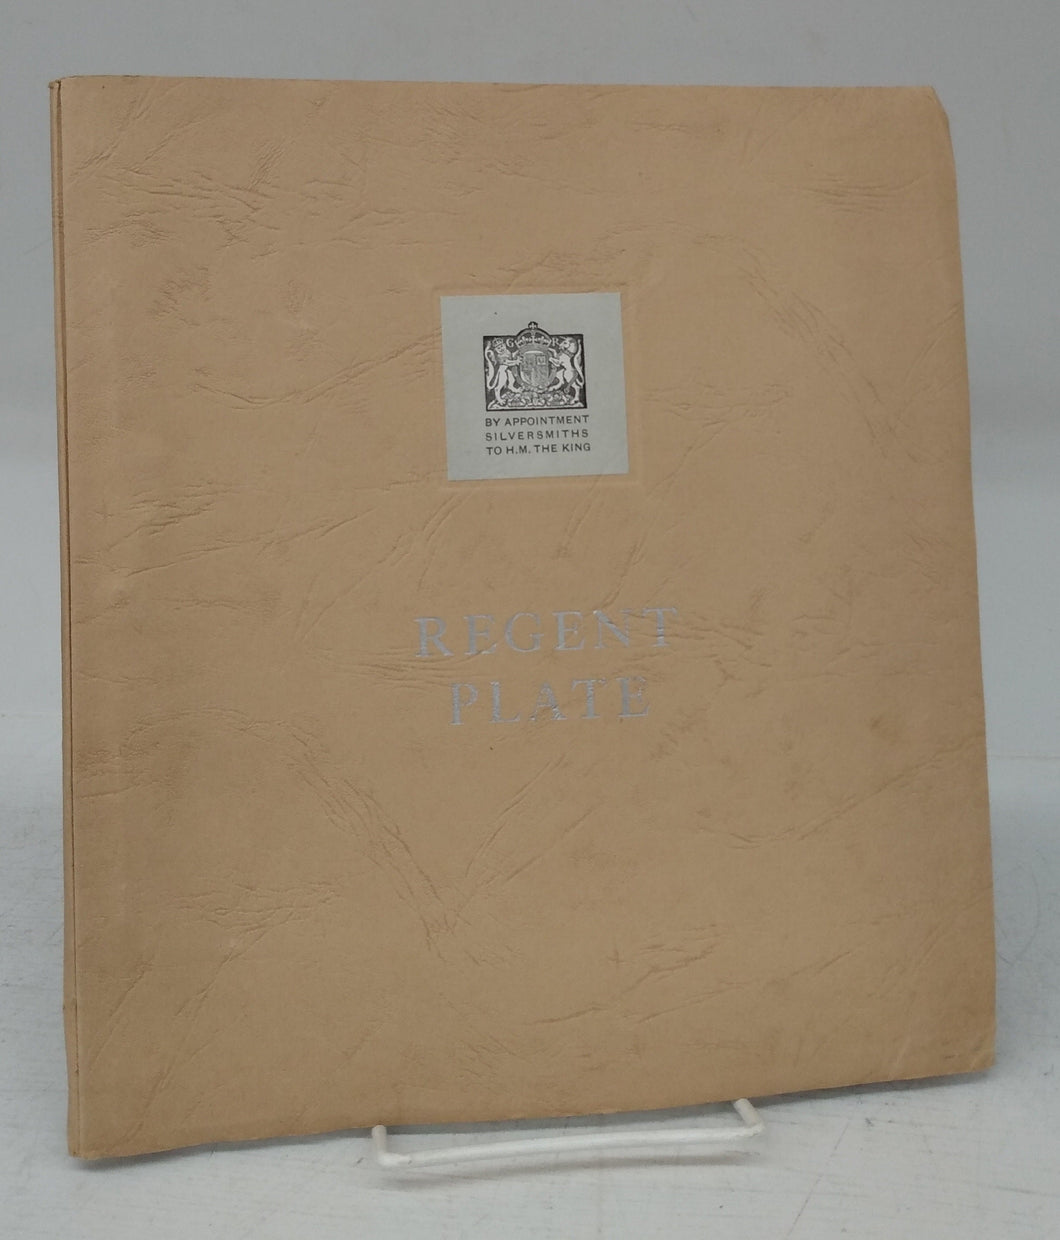 A Catalogue of Regent Plate and Cutlery